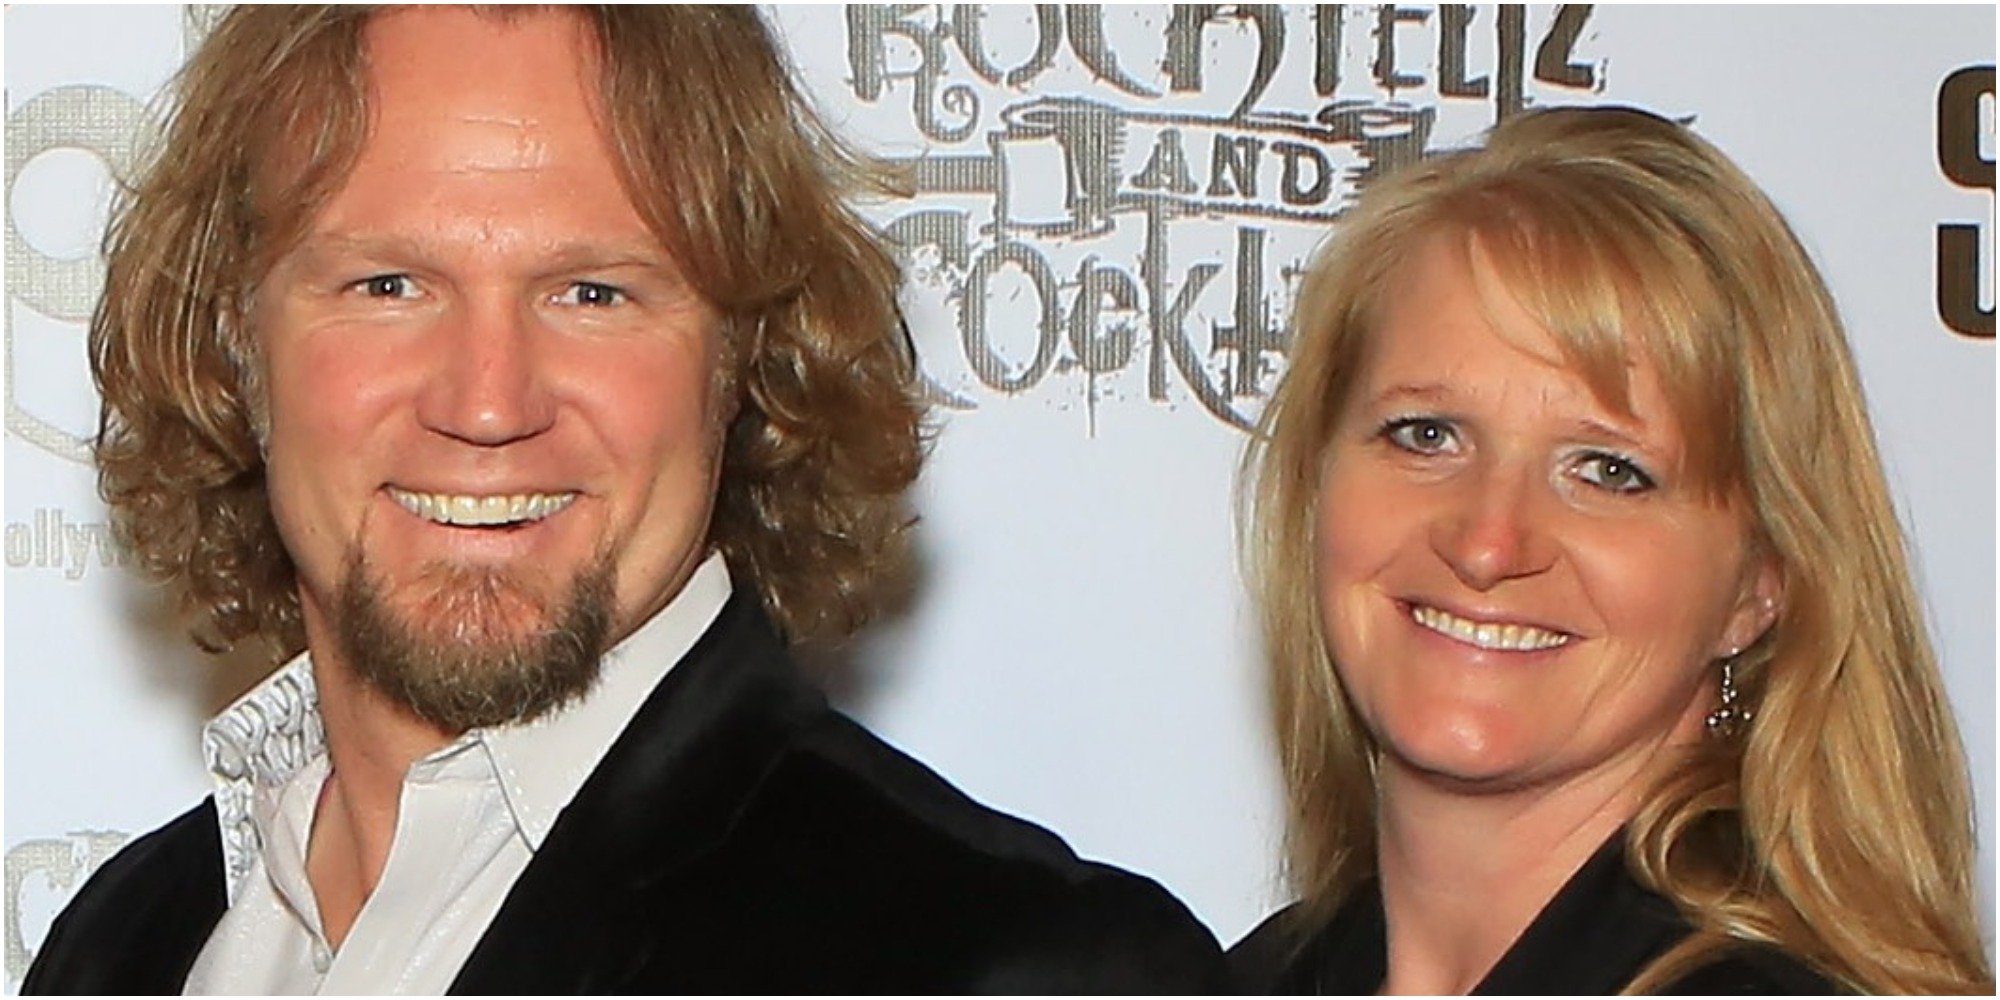 Kody and Christine Brown of Sister Wives pose at a red carpet event.